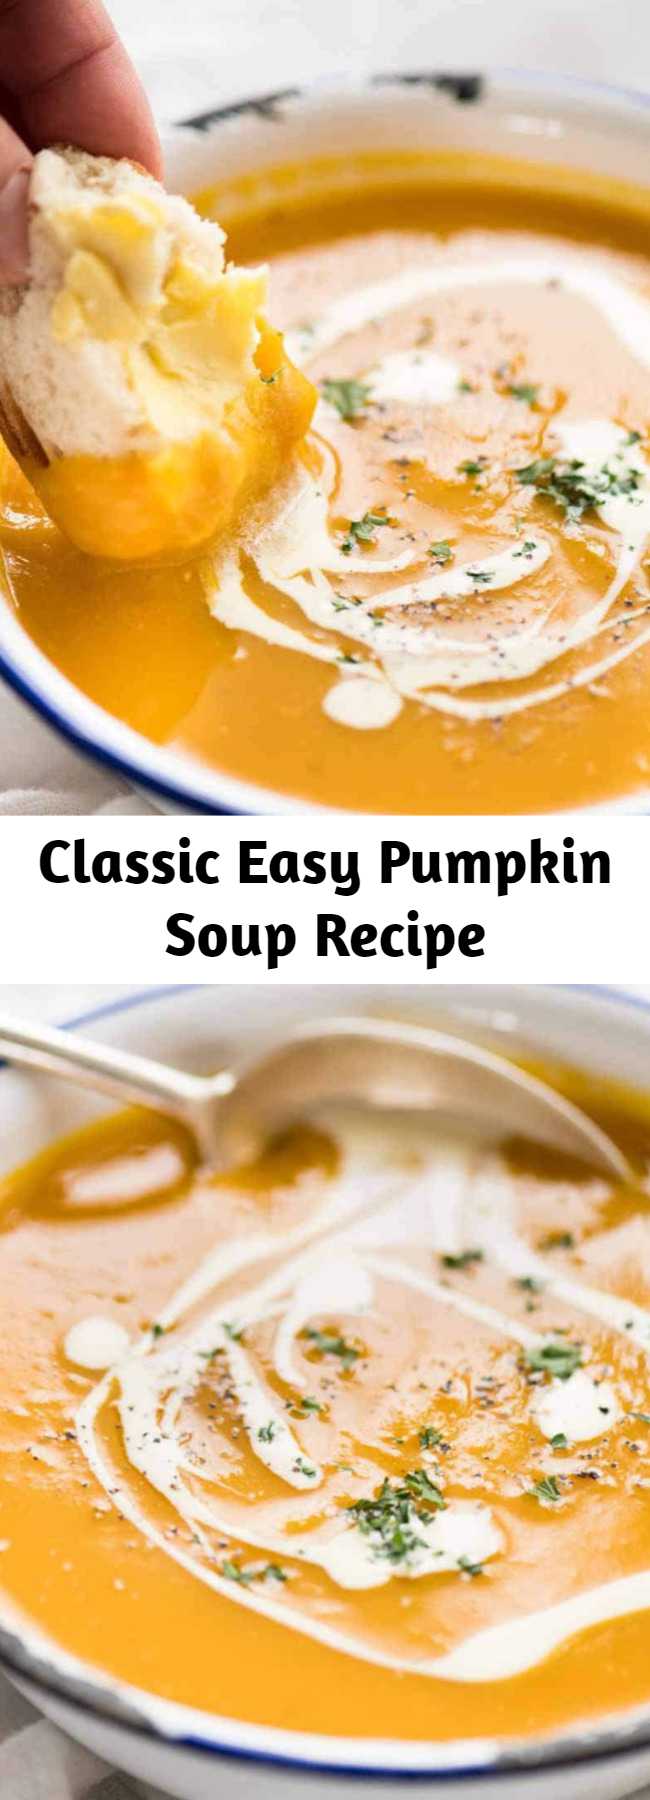 Classic Easy Pumpkin Soup Recipe - This is a classic, easy pumpkin soup made with fresh pumpkin that is very fast to make. Thick, creamy and full of flavour, this is THE pumpkin soup recipe you will make now and forever!